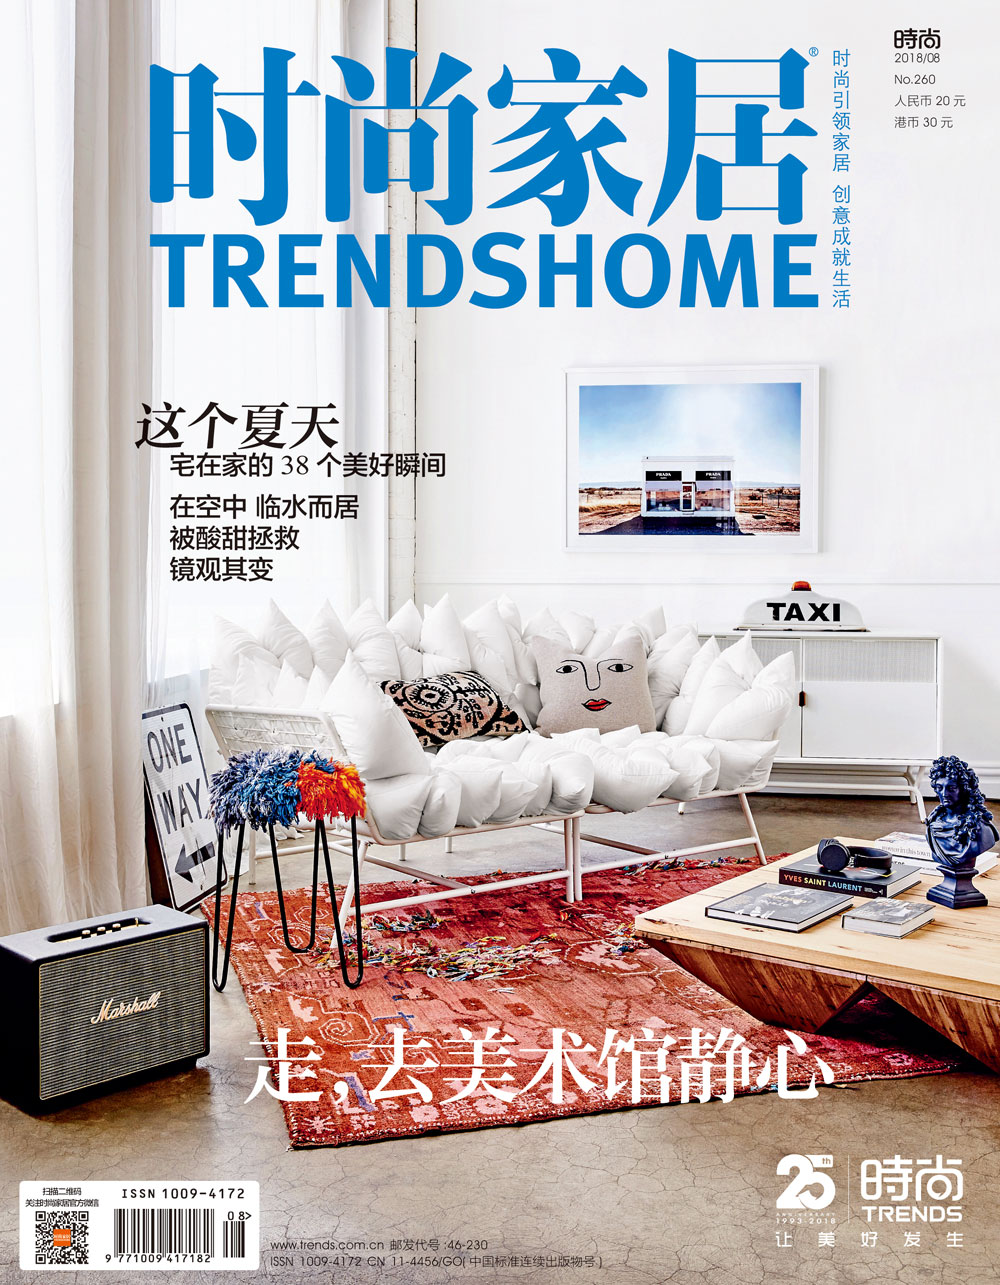 Trend Home Aug.2018